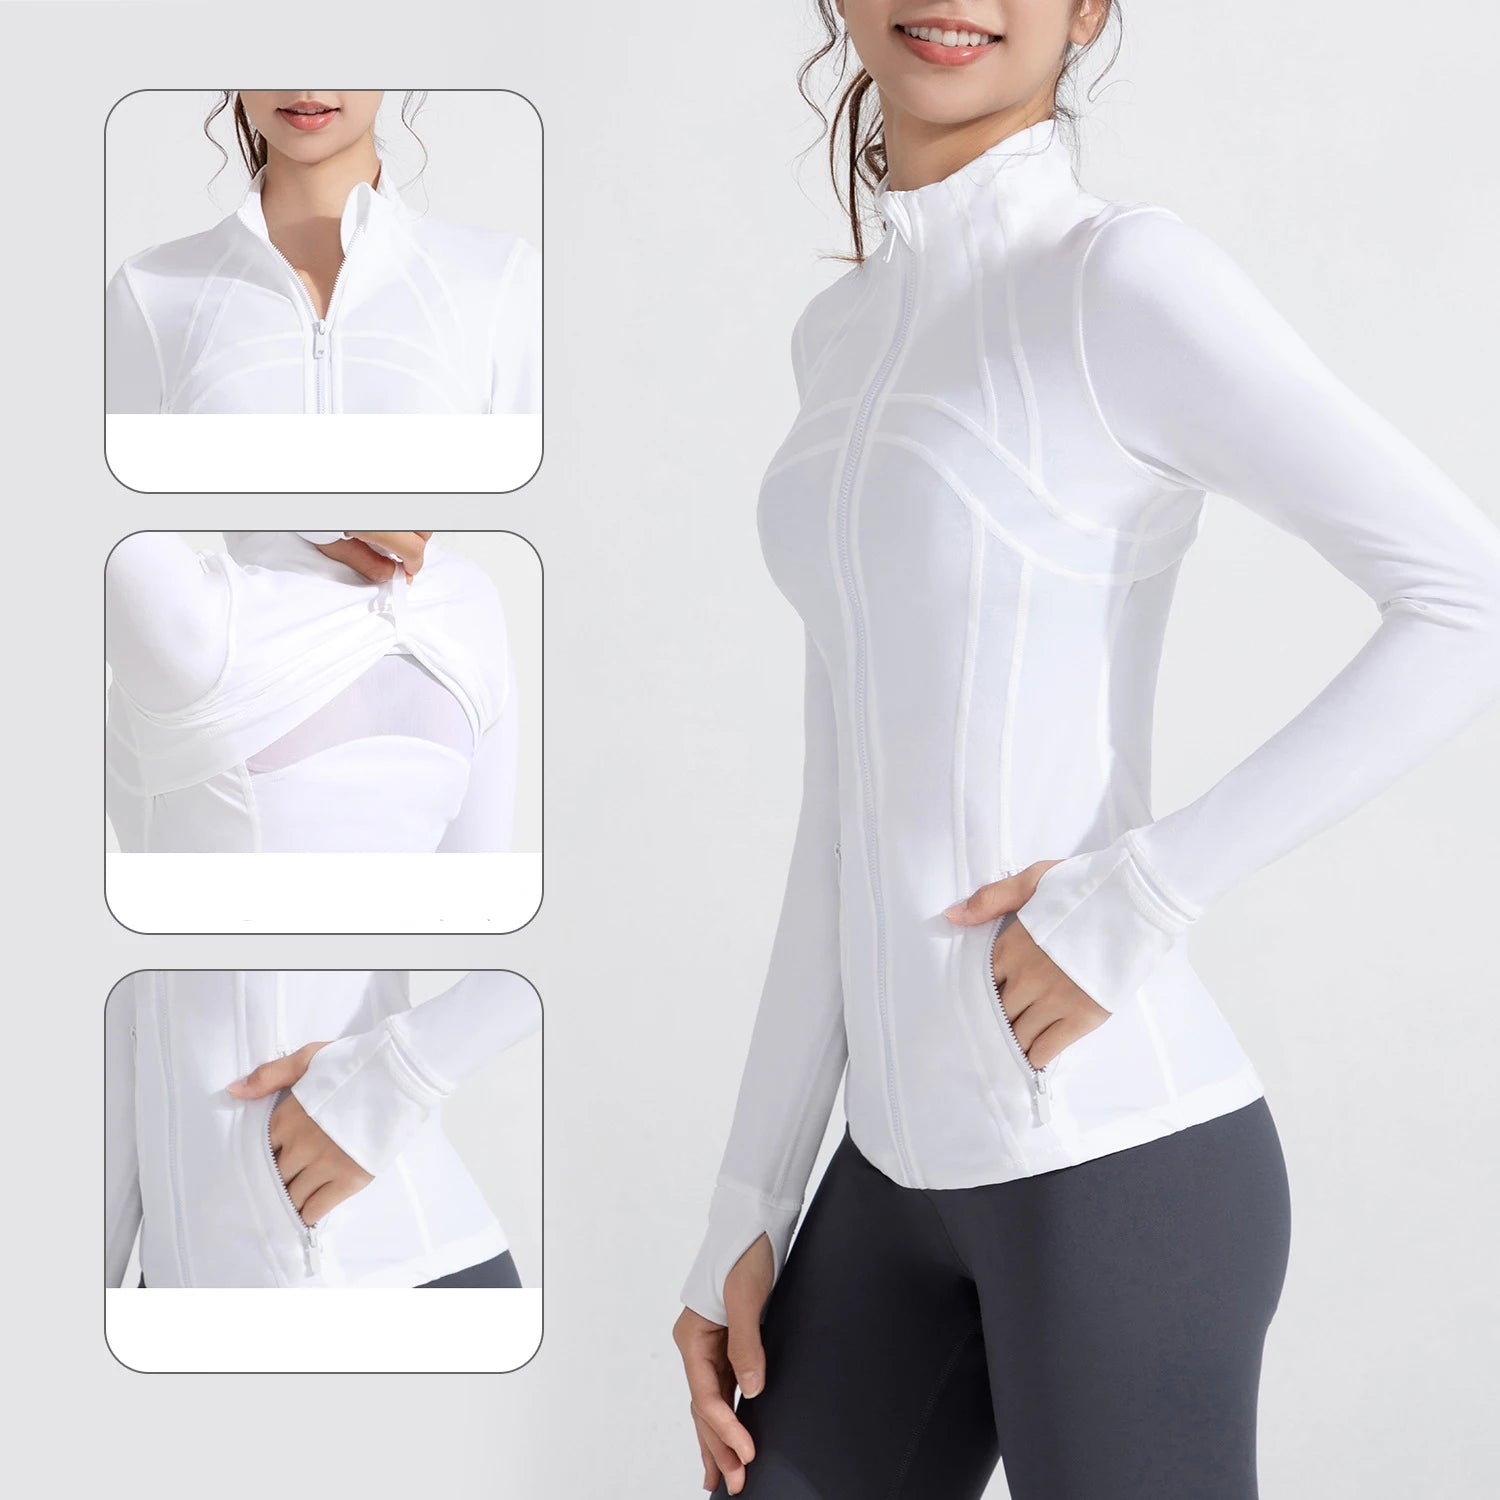 Stand-Up Collar Yoga Clothing Jacket With Pocket Woman Long-Sleeved Top Zipper Outdoor Fitness Running Sports Coat Women Tops - Women Casual - Women Prom